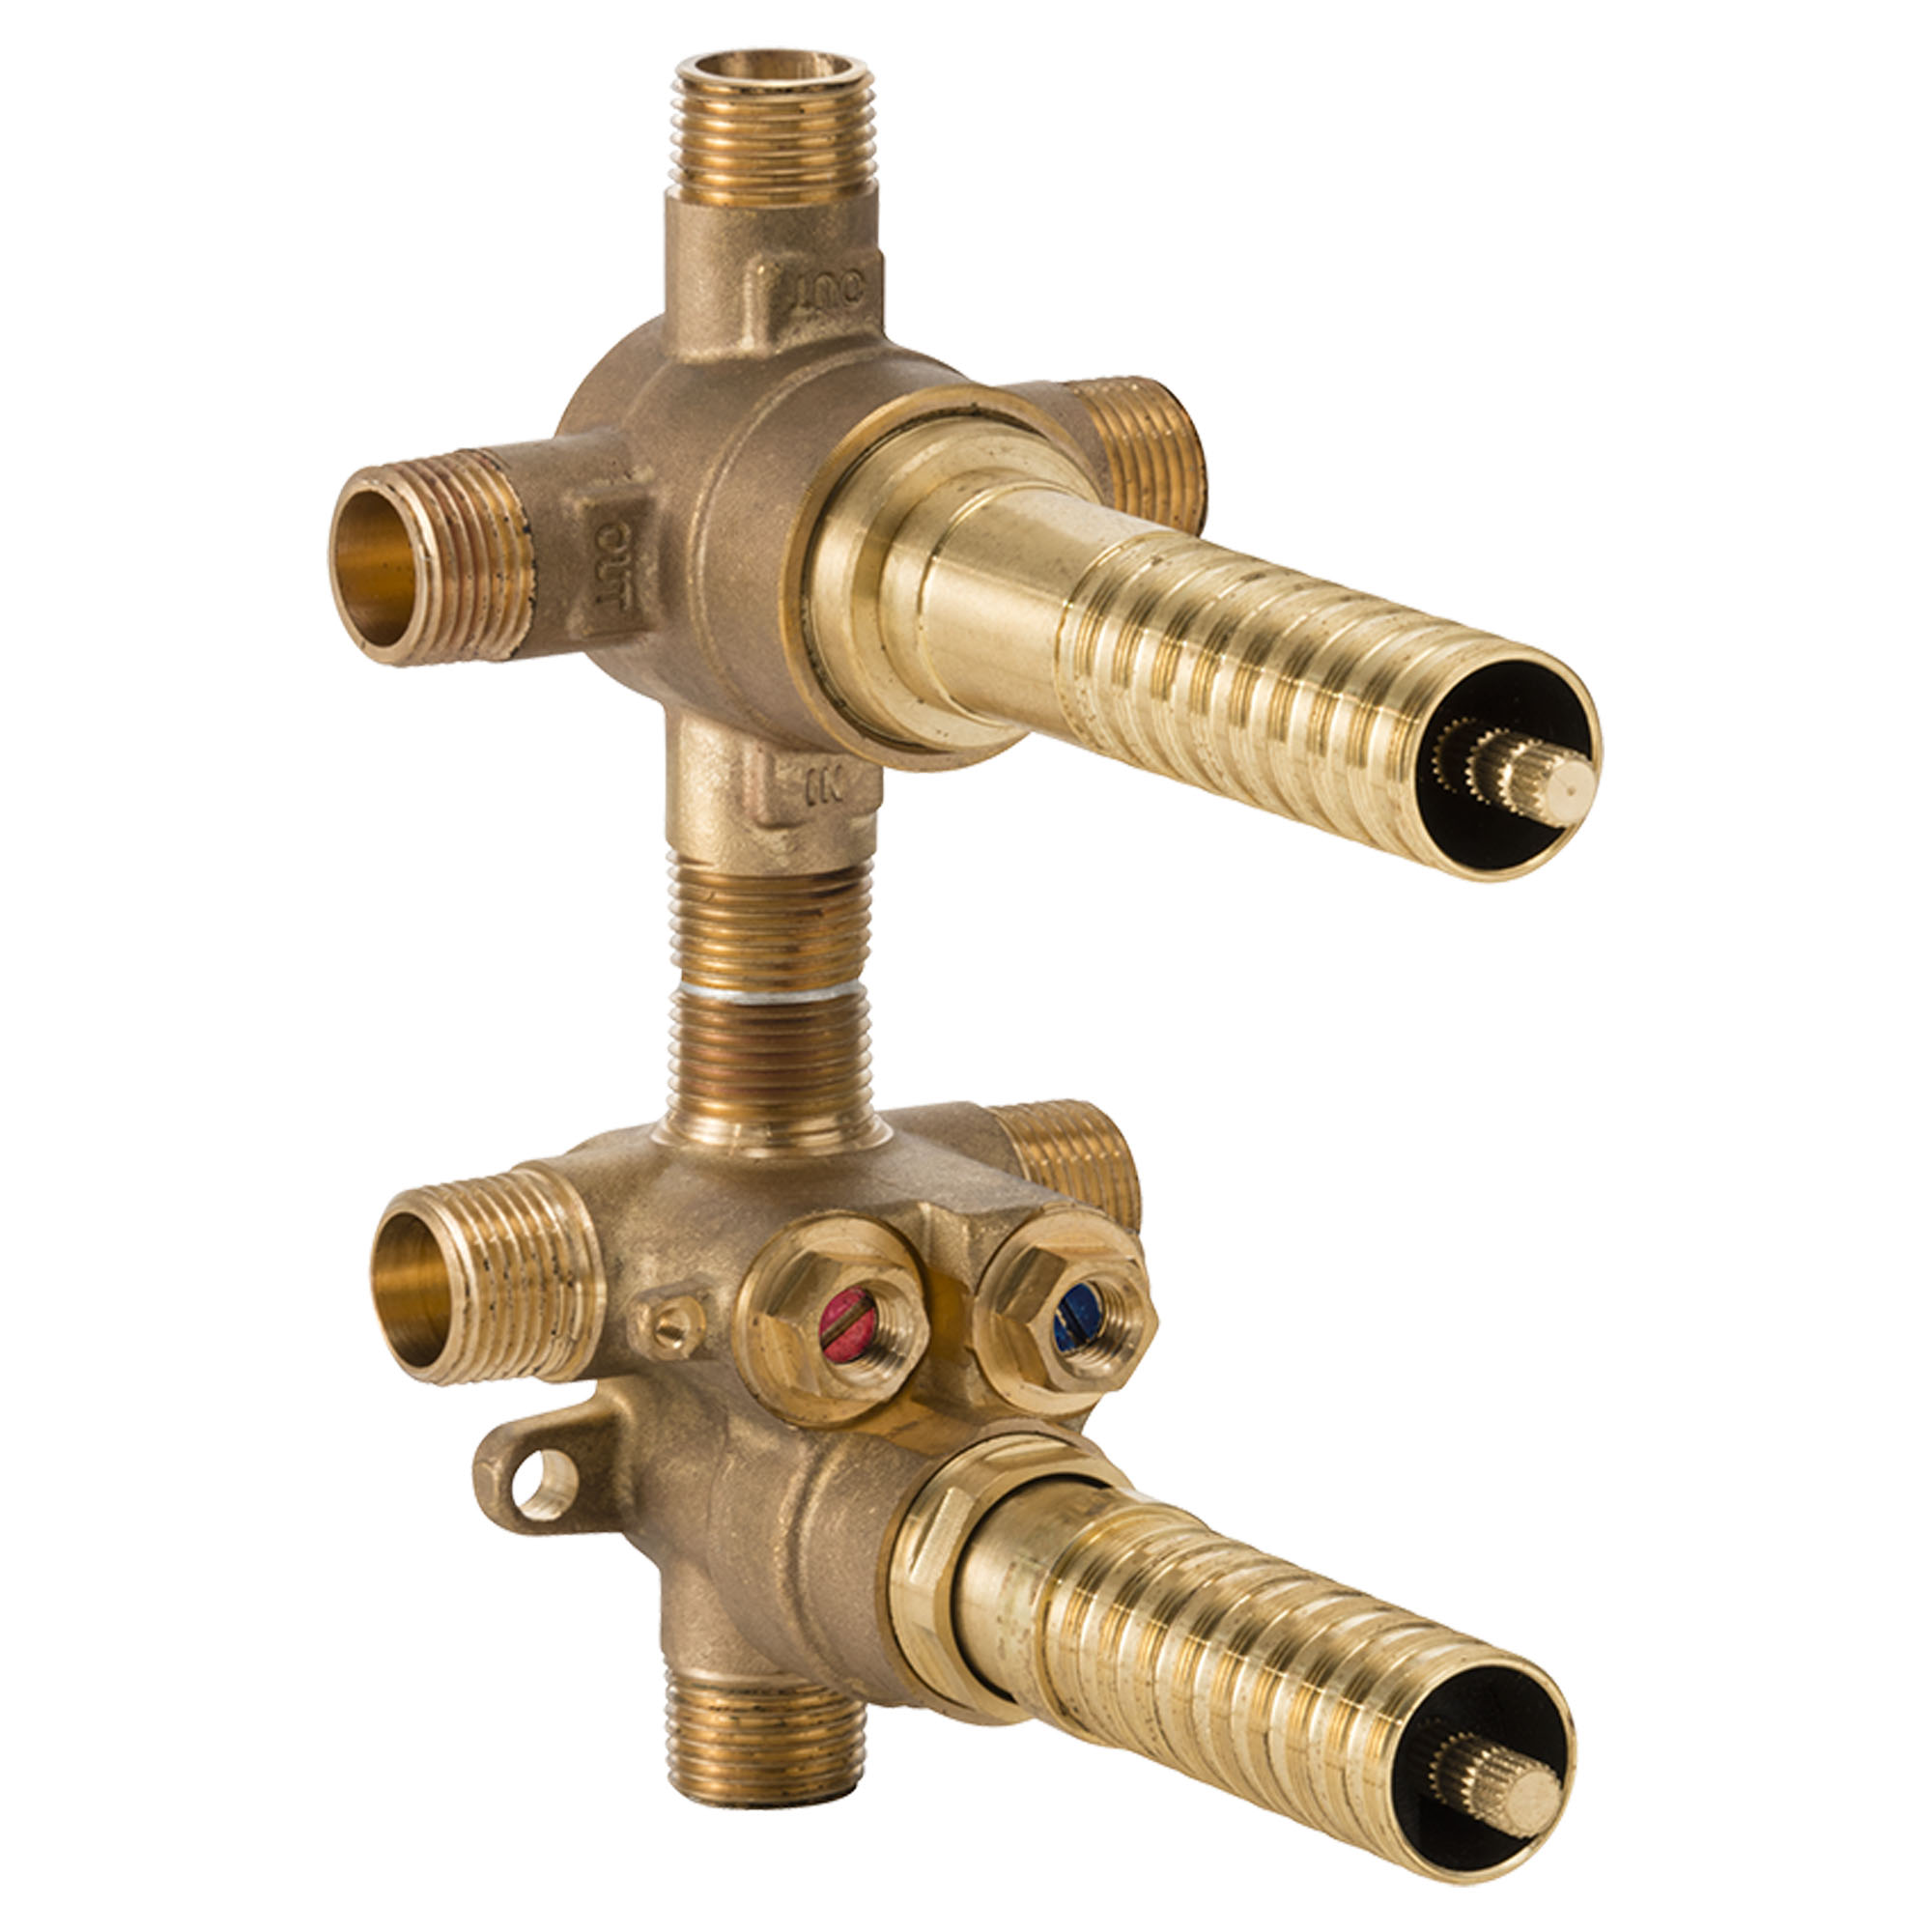 2-Handle Thermostatic Rough Valve with 3-Way Diverter Shared Functions